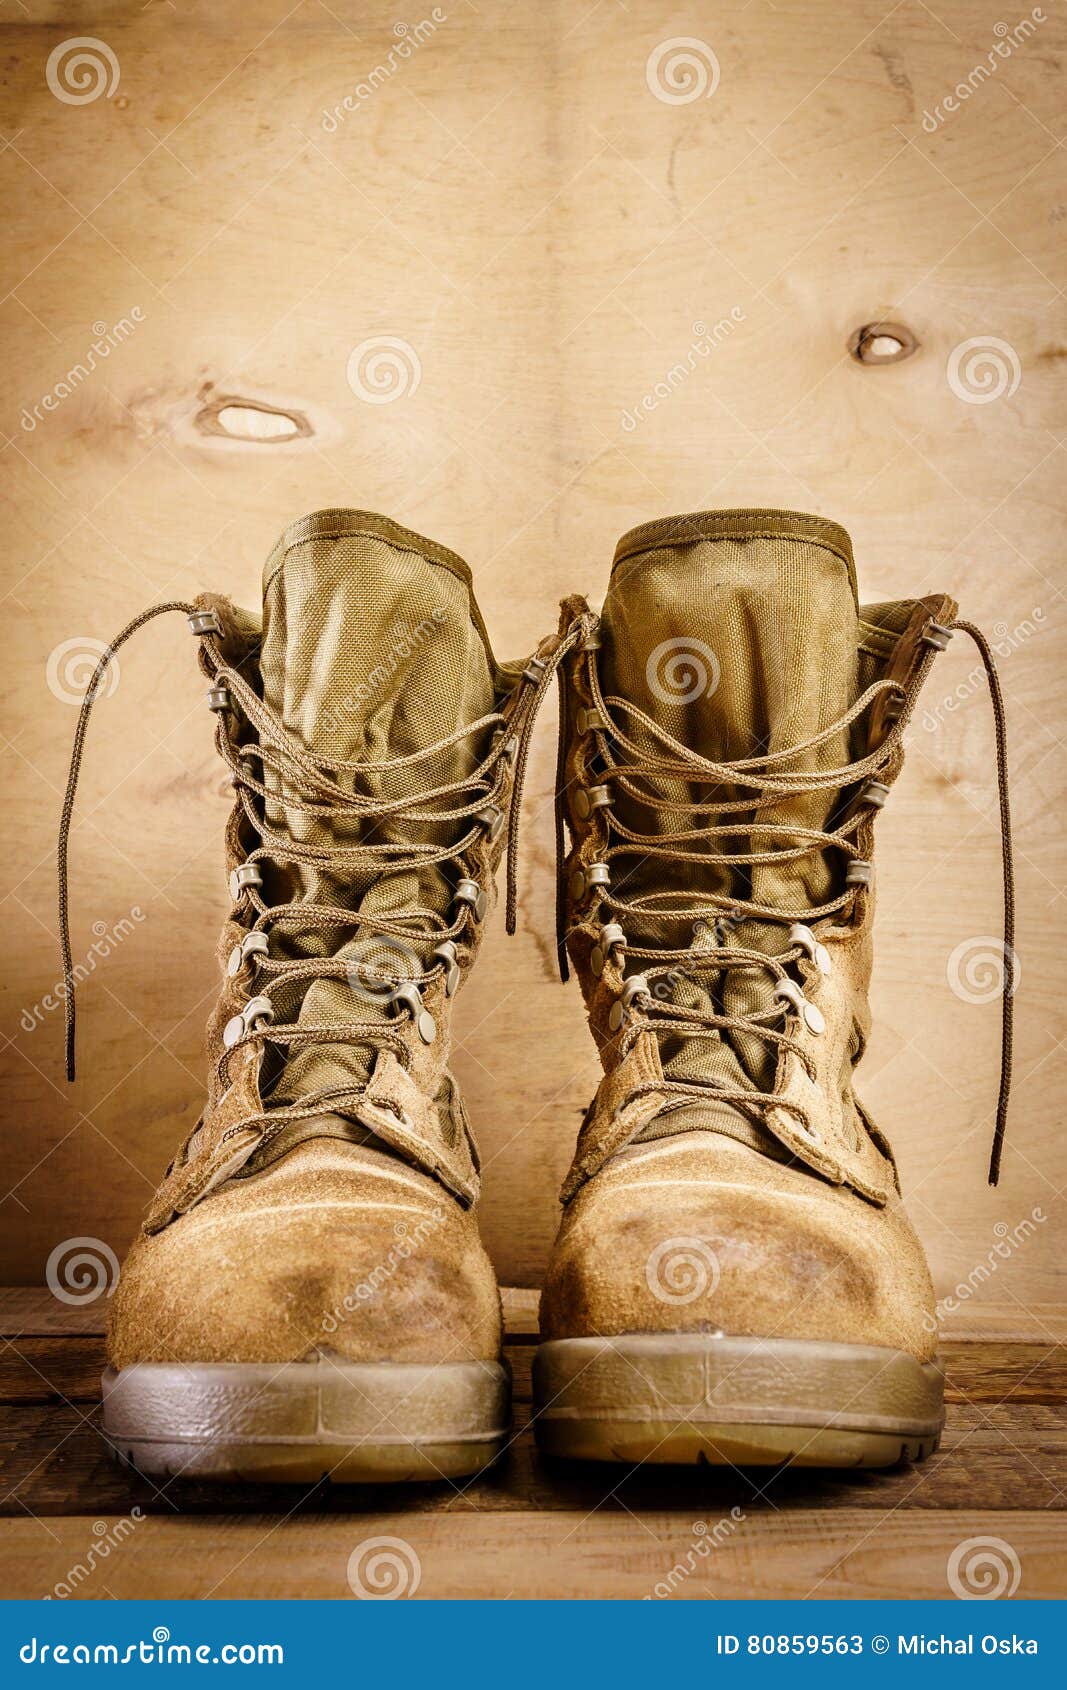 Old Military Boots on the Table Stock Image - Image of lace, boots ...